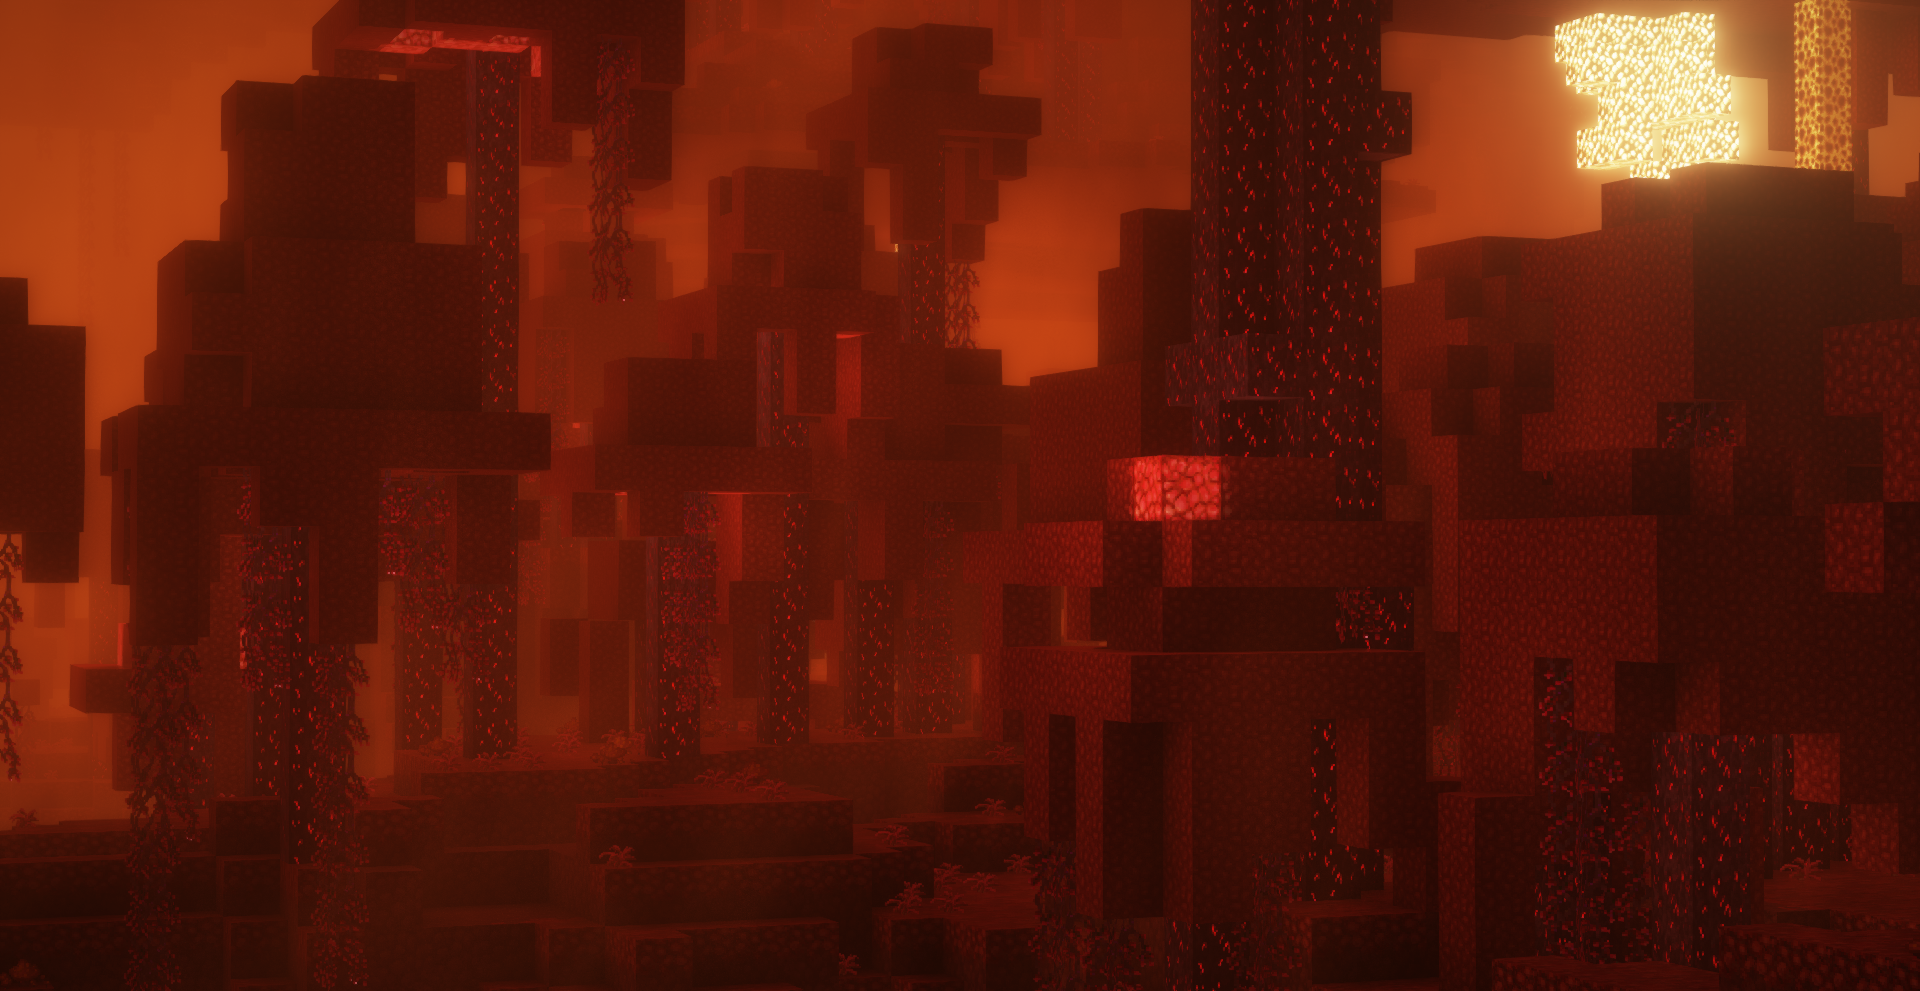 Nether